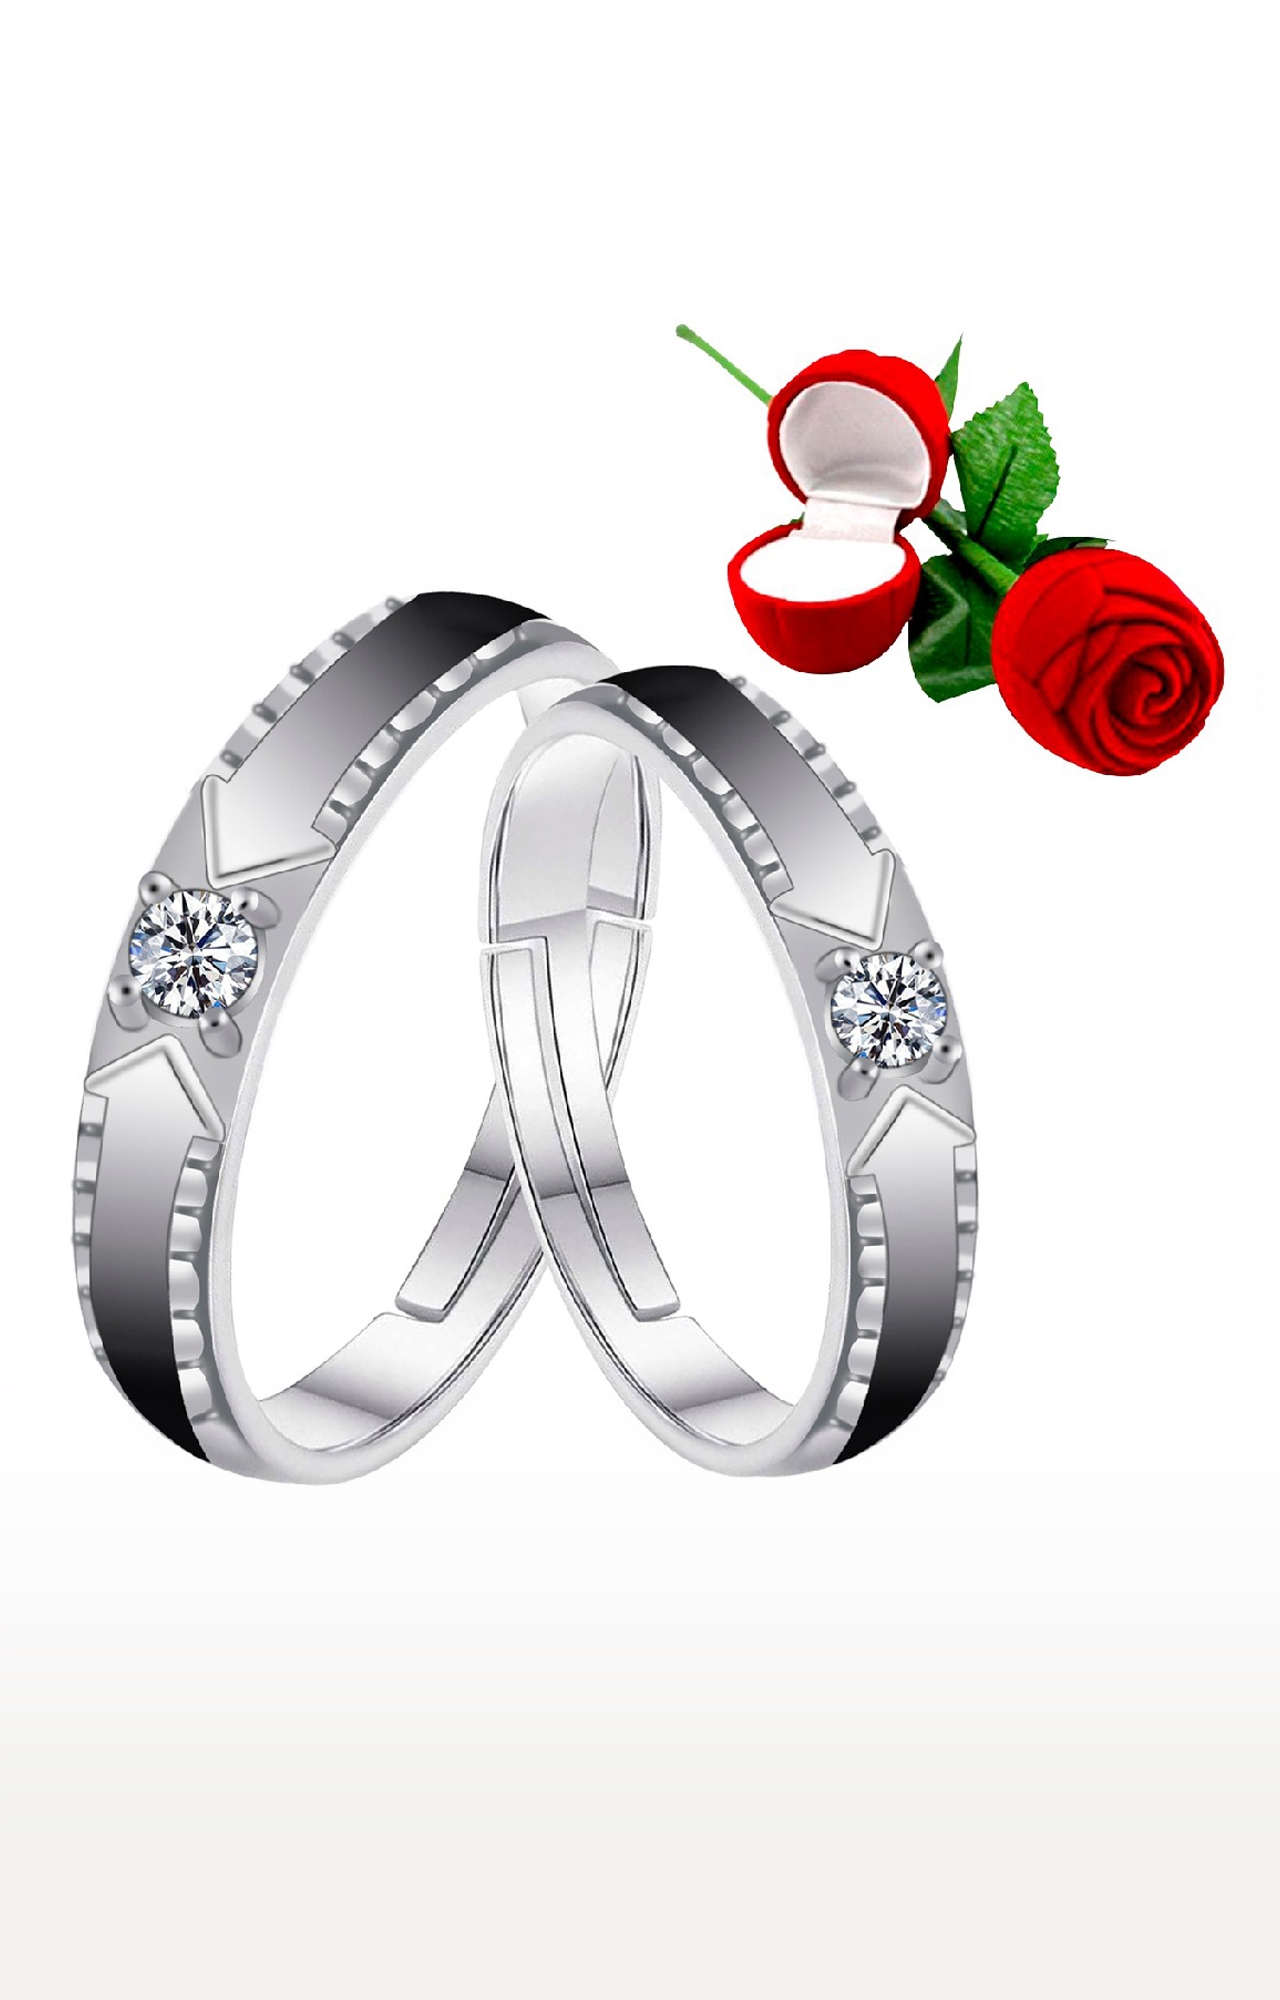 SILVER SHINE |  Silver Plated Adjustable Couple Rings Set for lovers Ring with 1 Piece Red Rose Gift Box for Men and Women 0